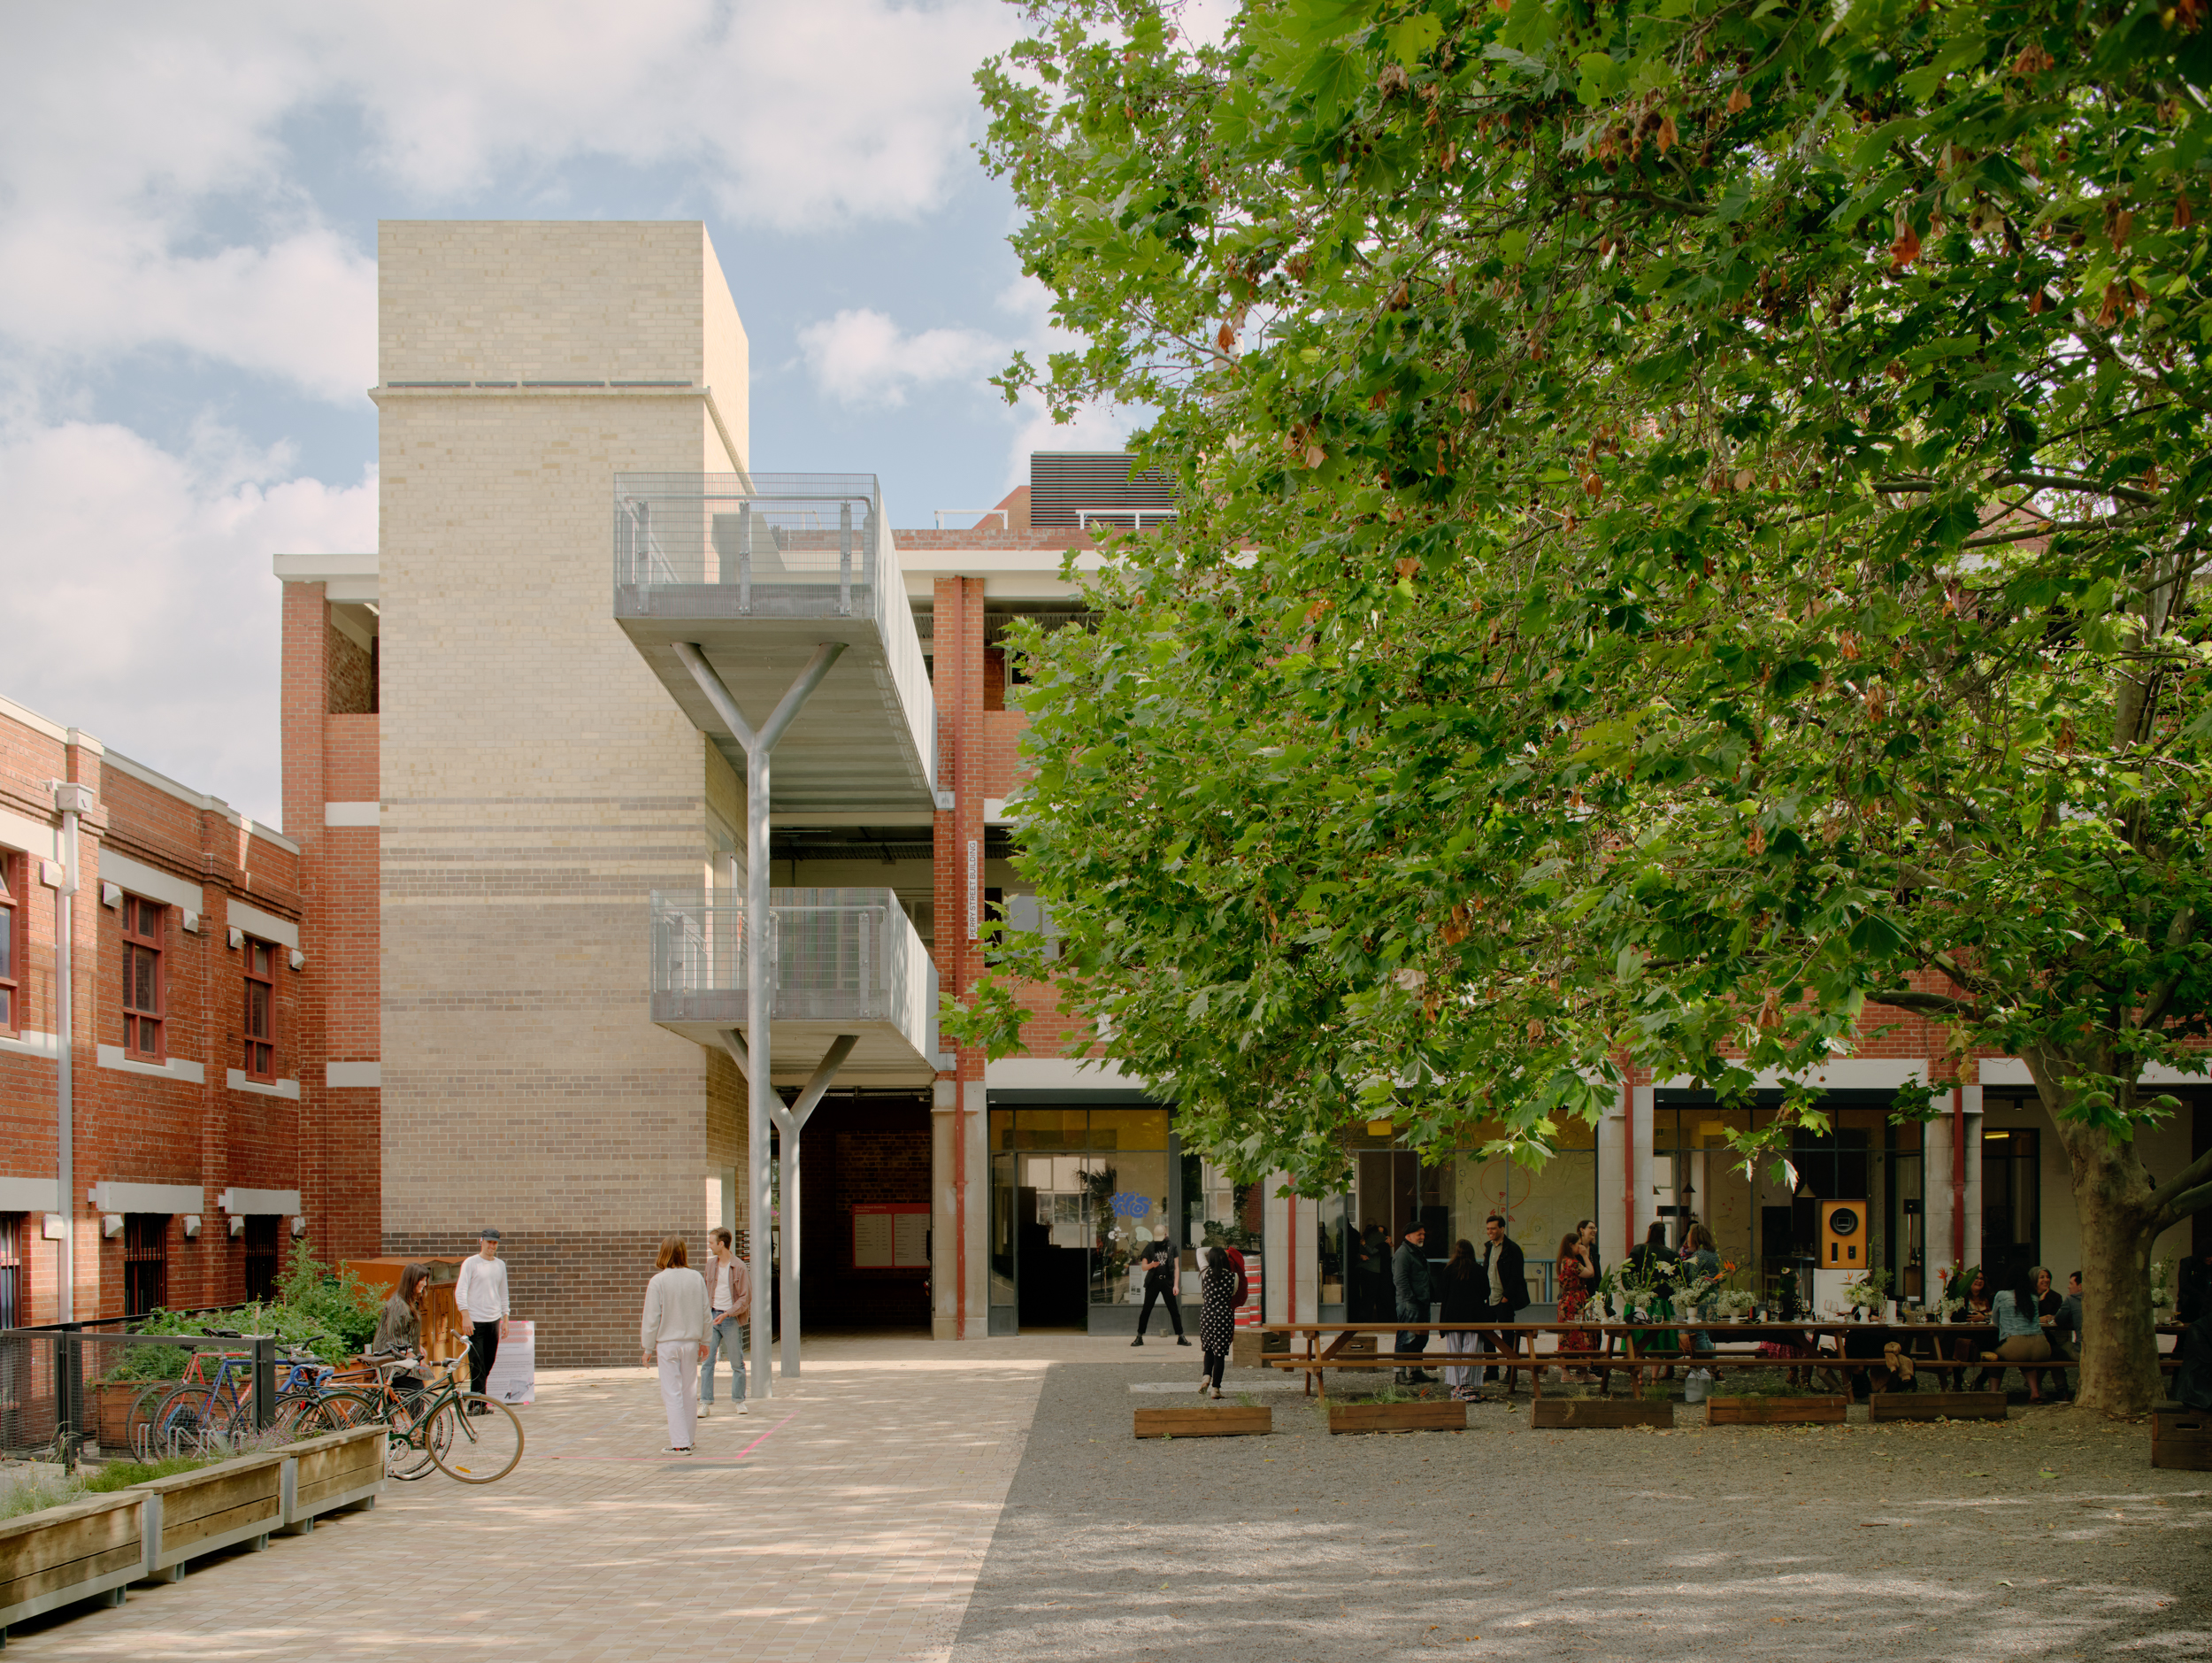 The central courtyard with a leafy tree, and steel walkways and brick facades visible. Some people gather under the tree